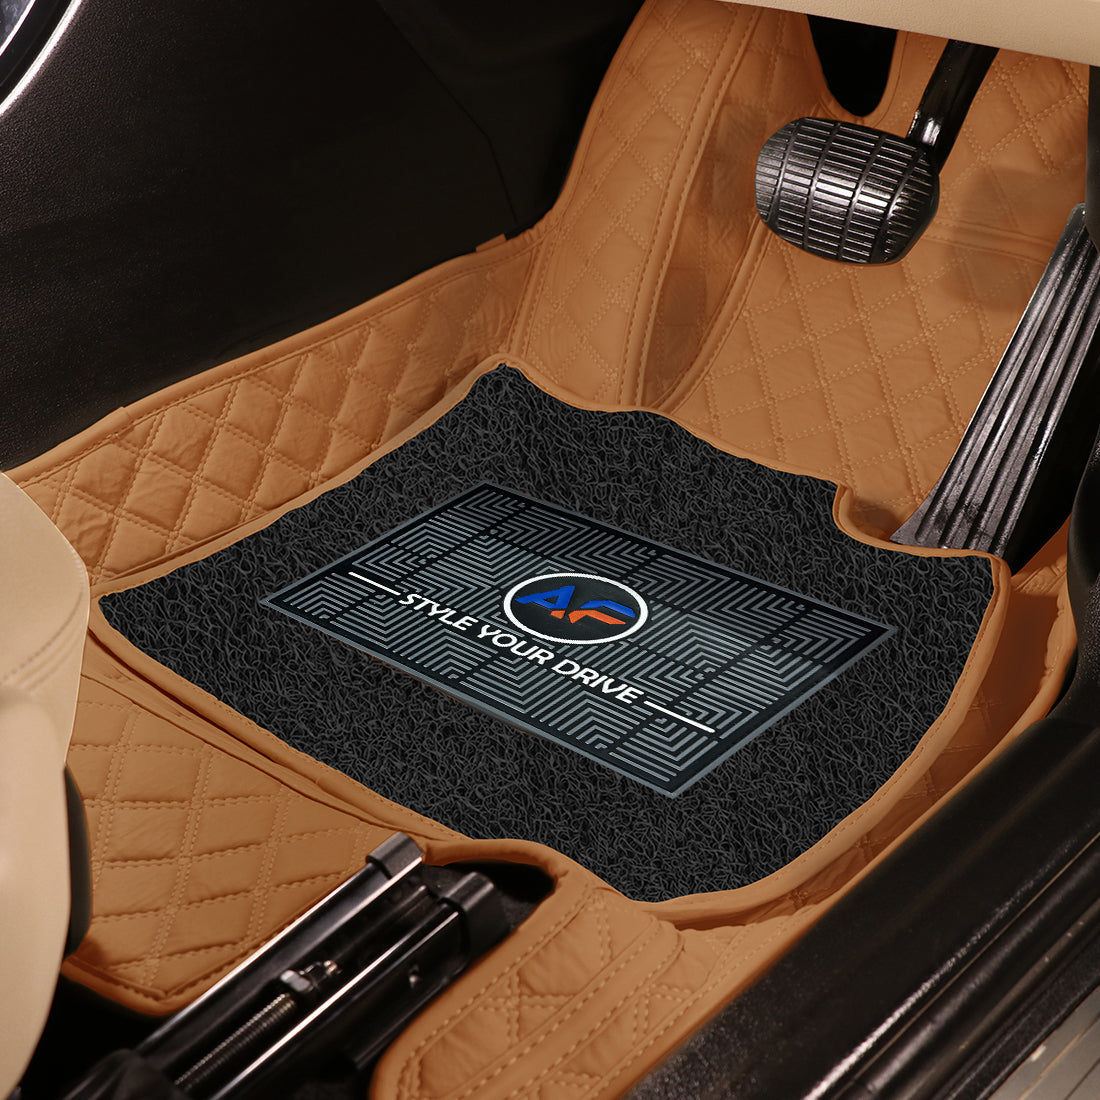 Land Rover Defender 130 2023-7D Luxury Car Mat, All Weather Proof, Anti-Skid, 100% Waterproof & Odorless with Unique Diamond Fish Design (24mm Luxury PU Leather, 2 Rows)